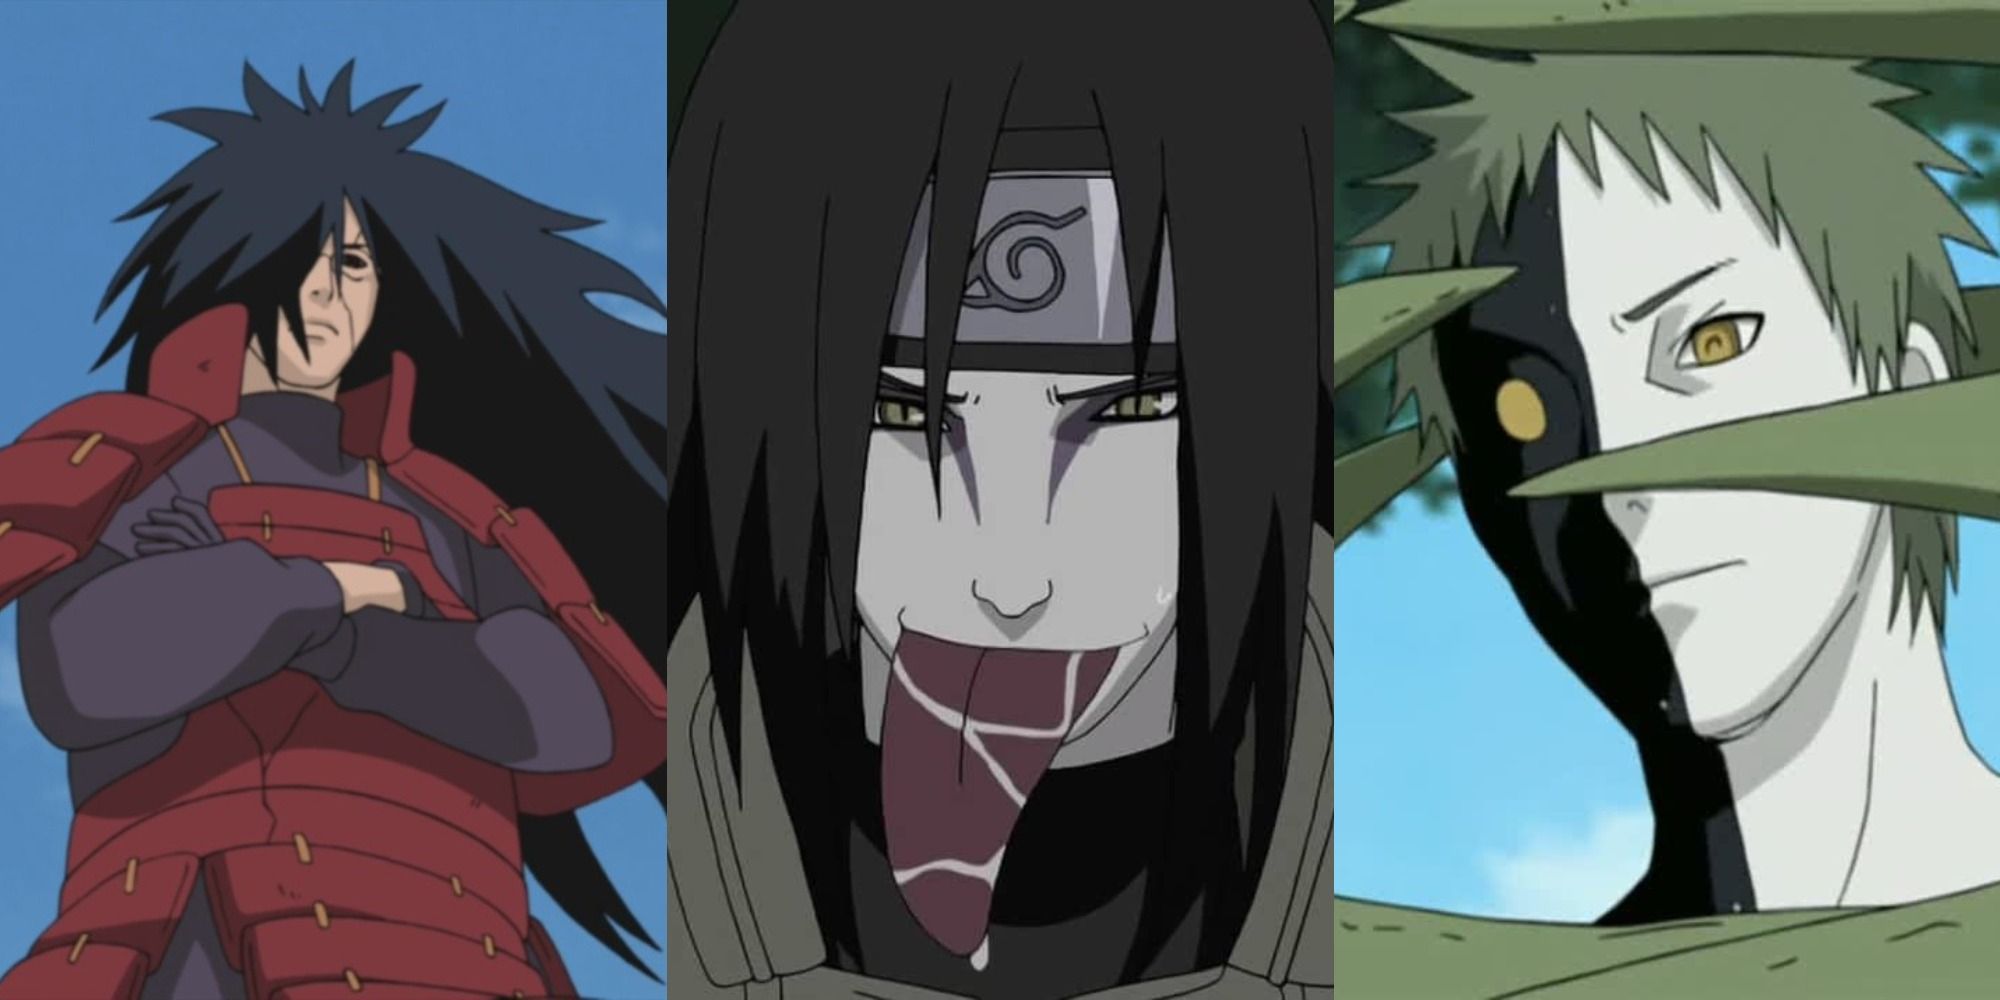 Who is the real villain in Naruto?